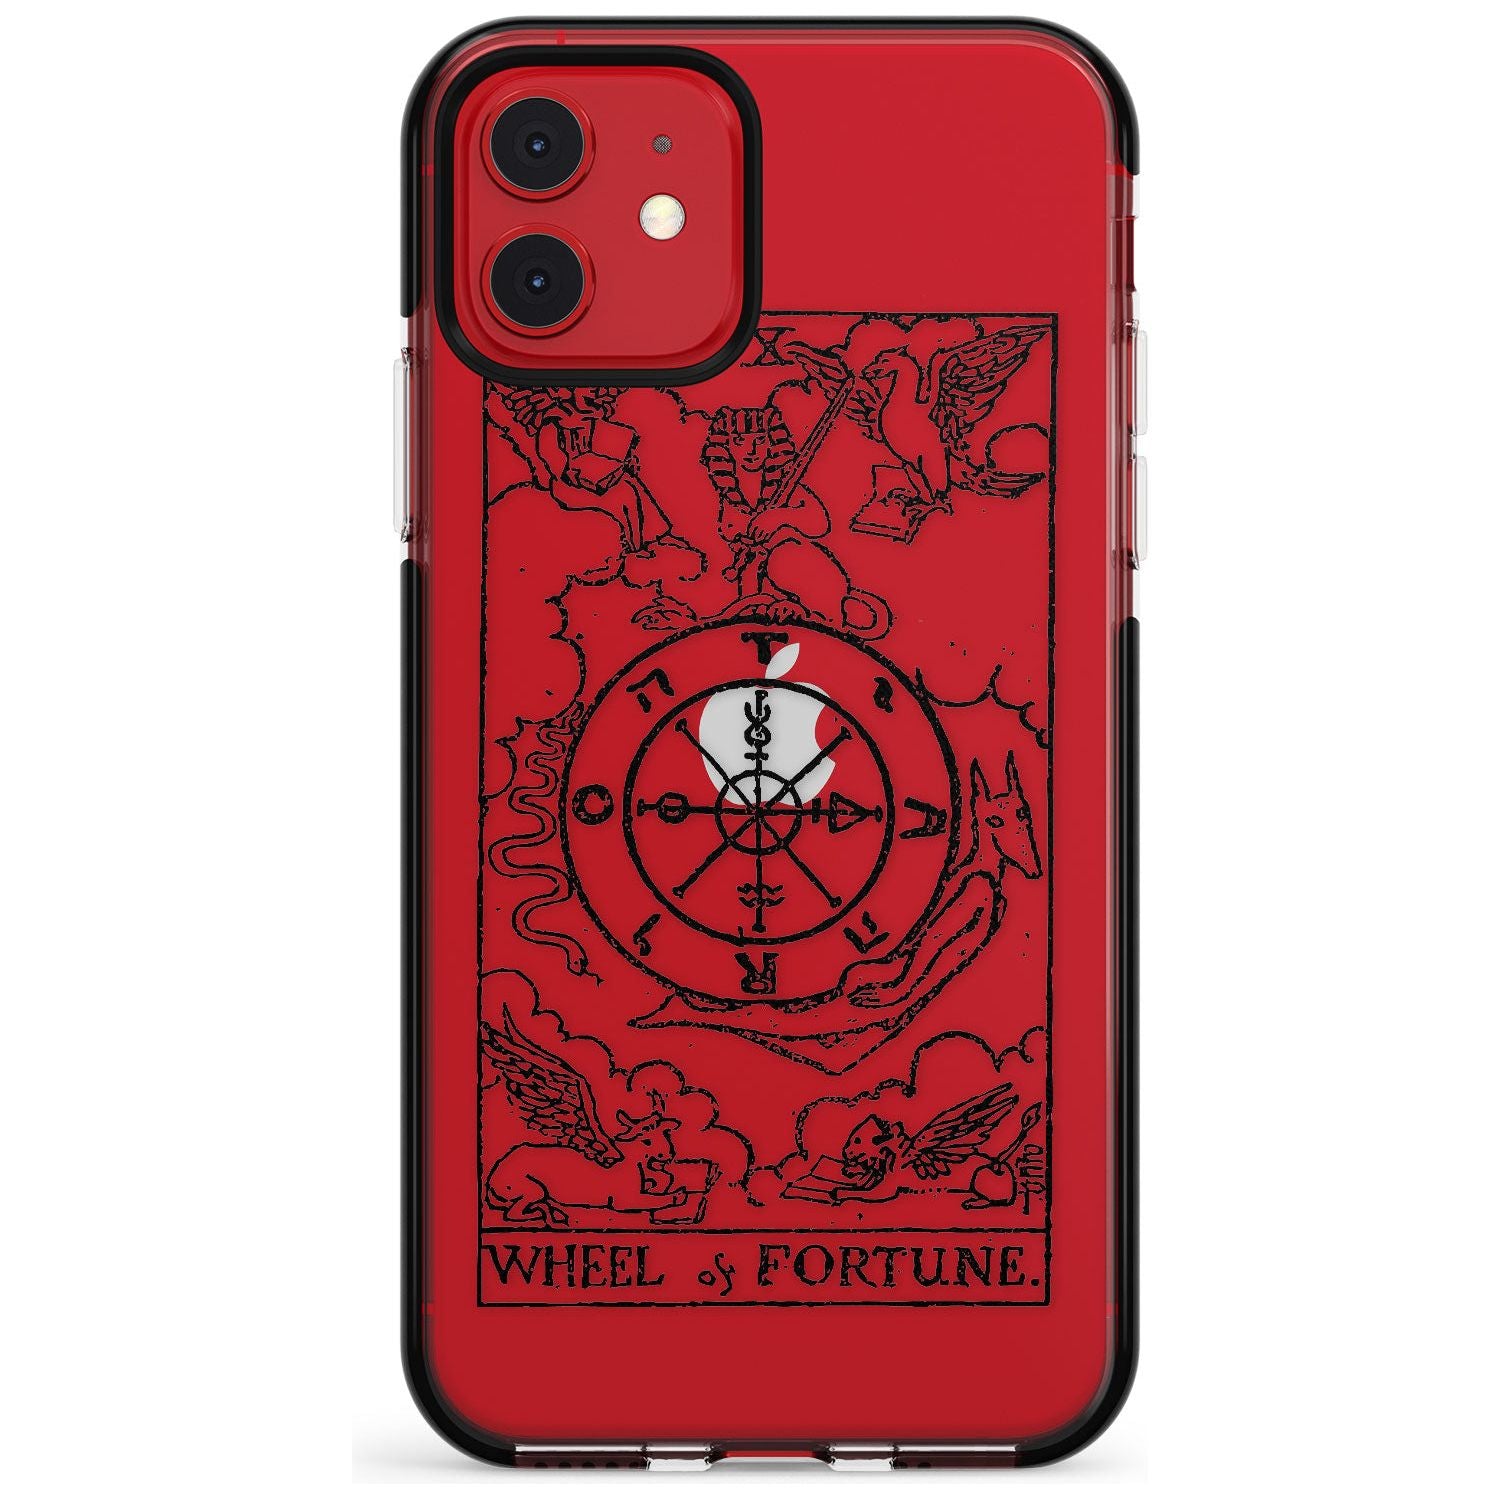 Wheel of Fortune Tarot Card - Transparent Pink Fade Impact Phone Case for iPhone 11 Pro Max